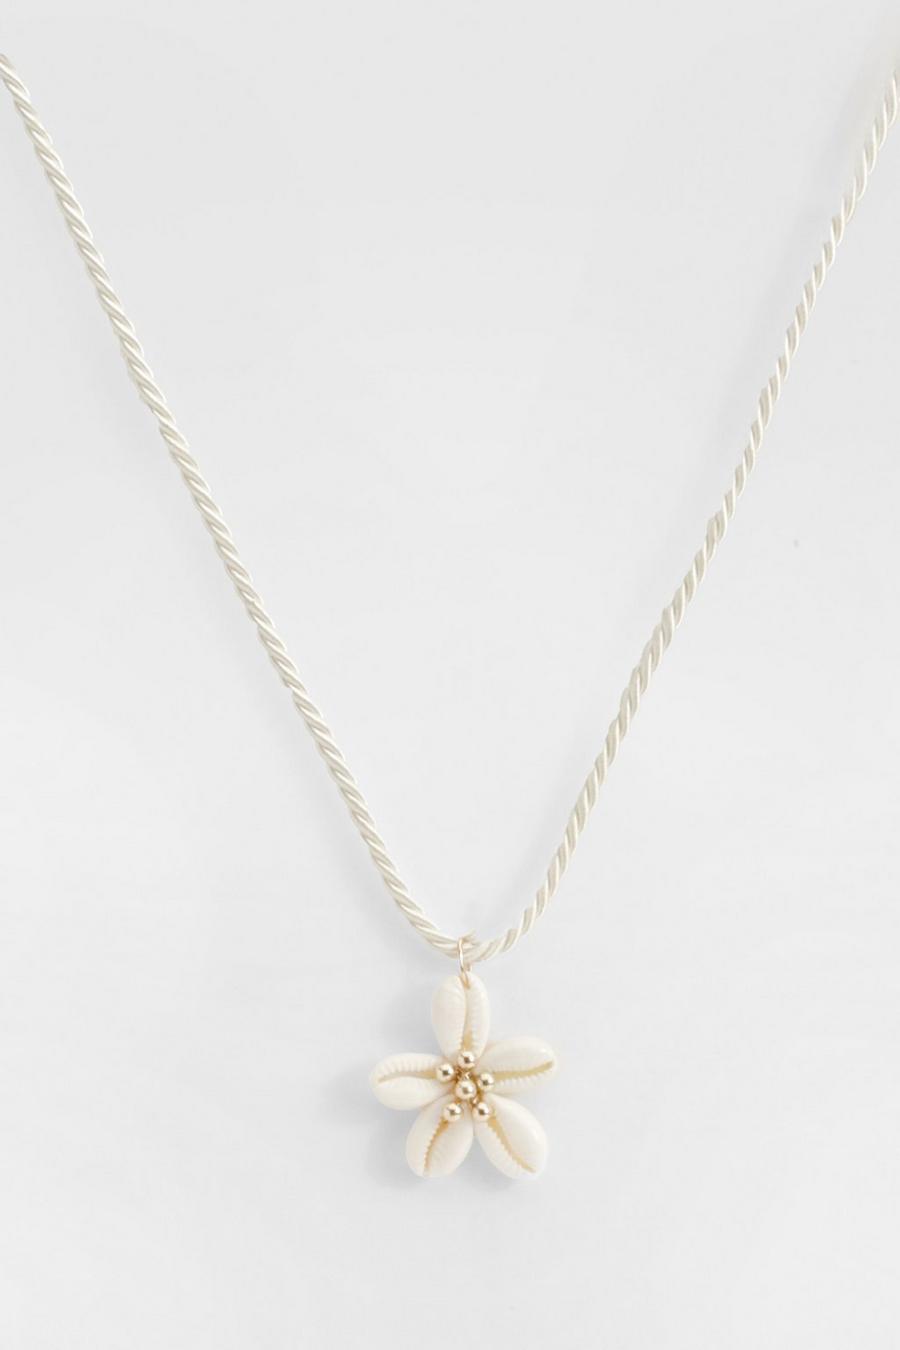 Shell Detailed Flower Rope Necklace, Ivory